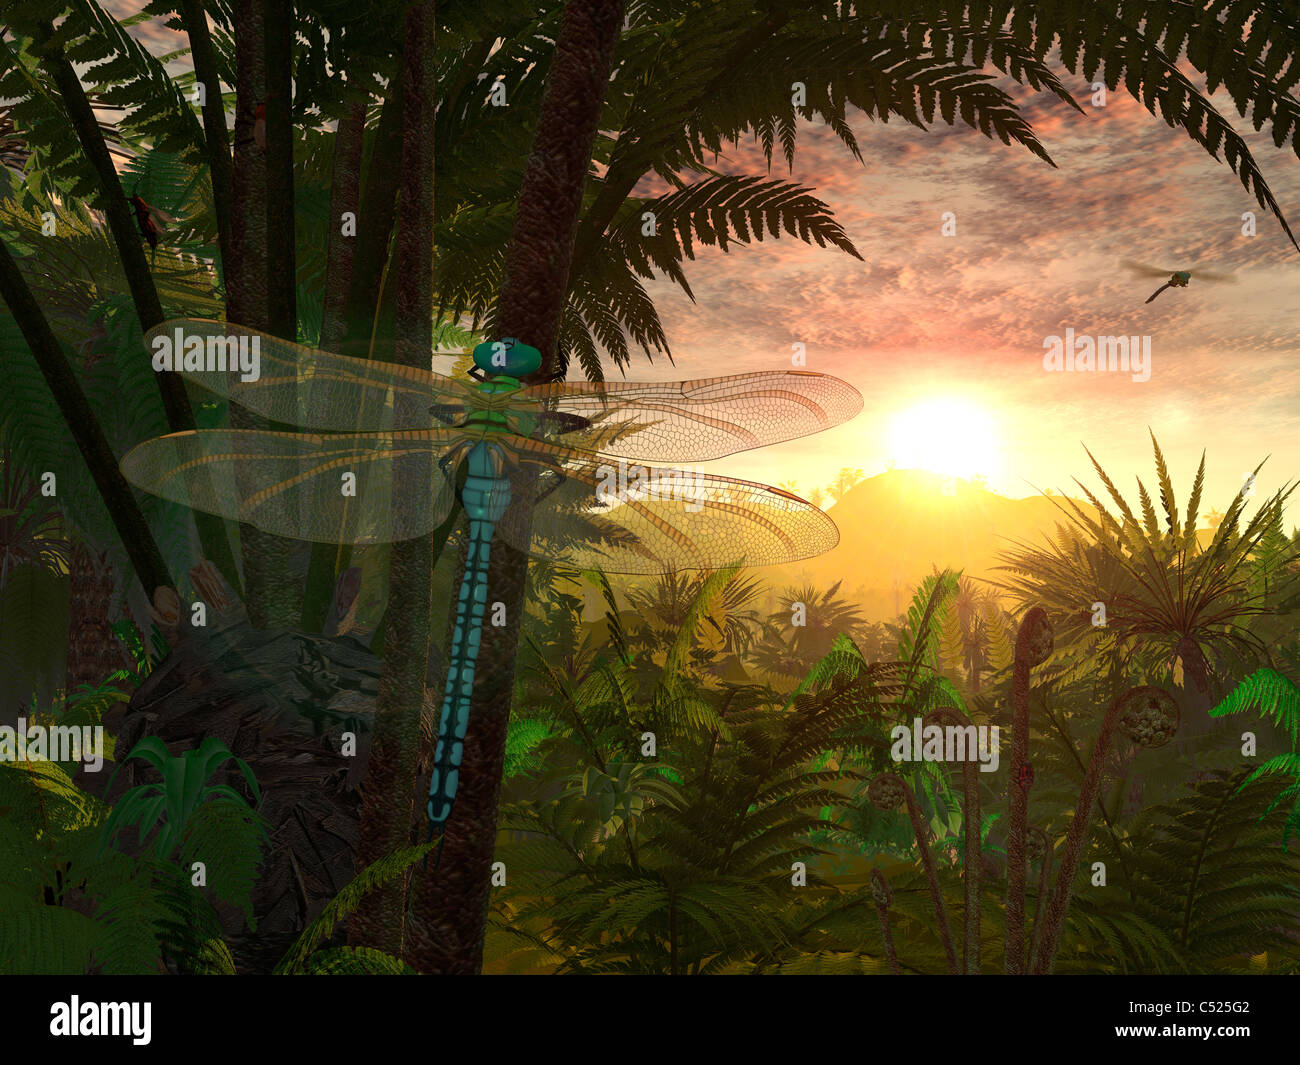 A giant Meganeura with a 30-inch wingspan witnesses a sunrise. Stock Photo